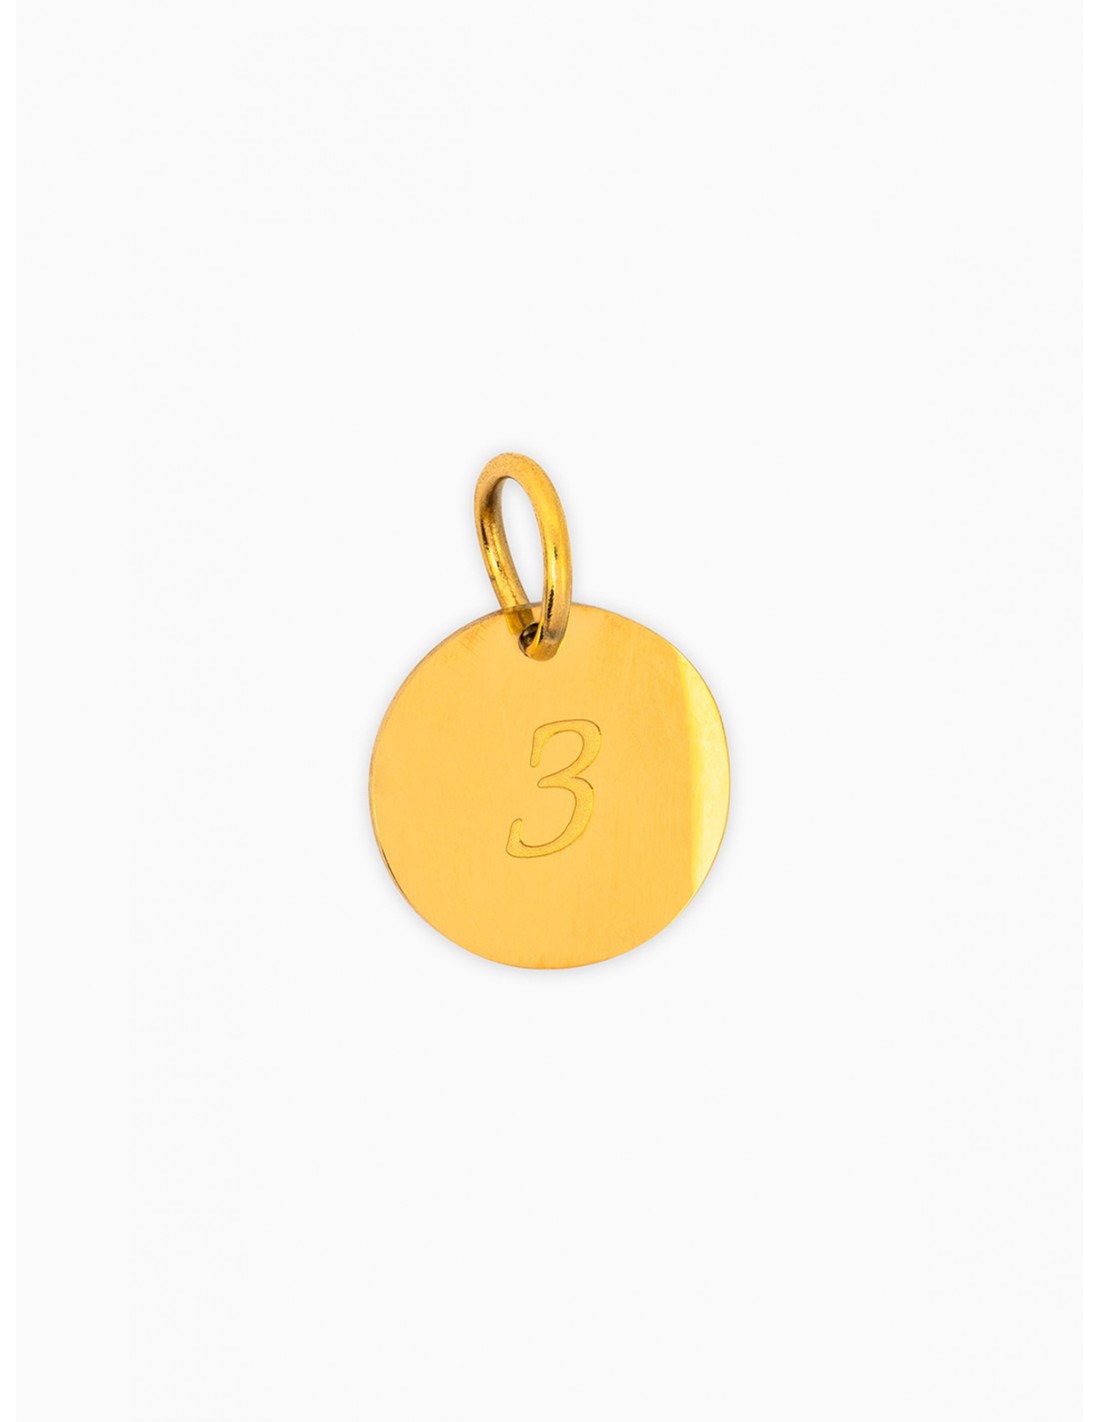 LUCKY GOLDEN NUMBER CHARM